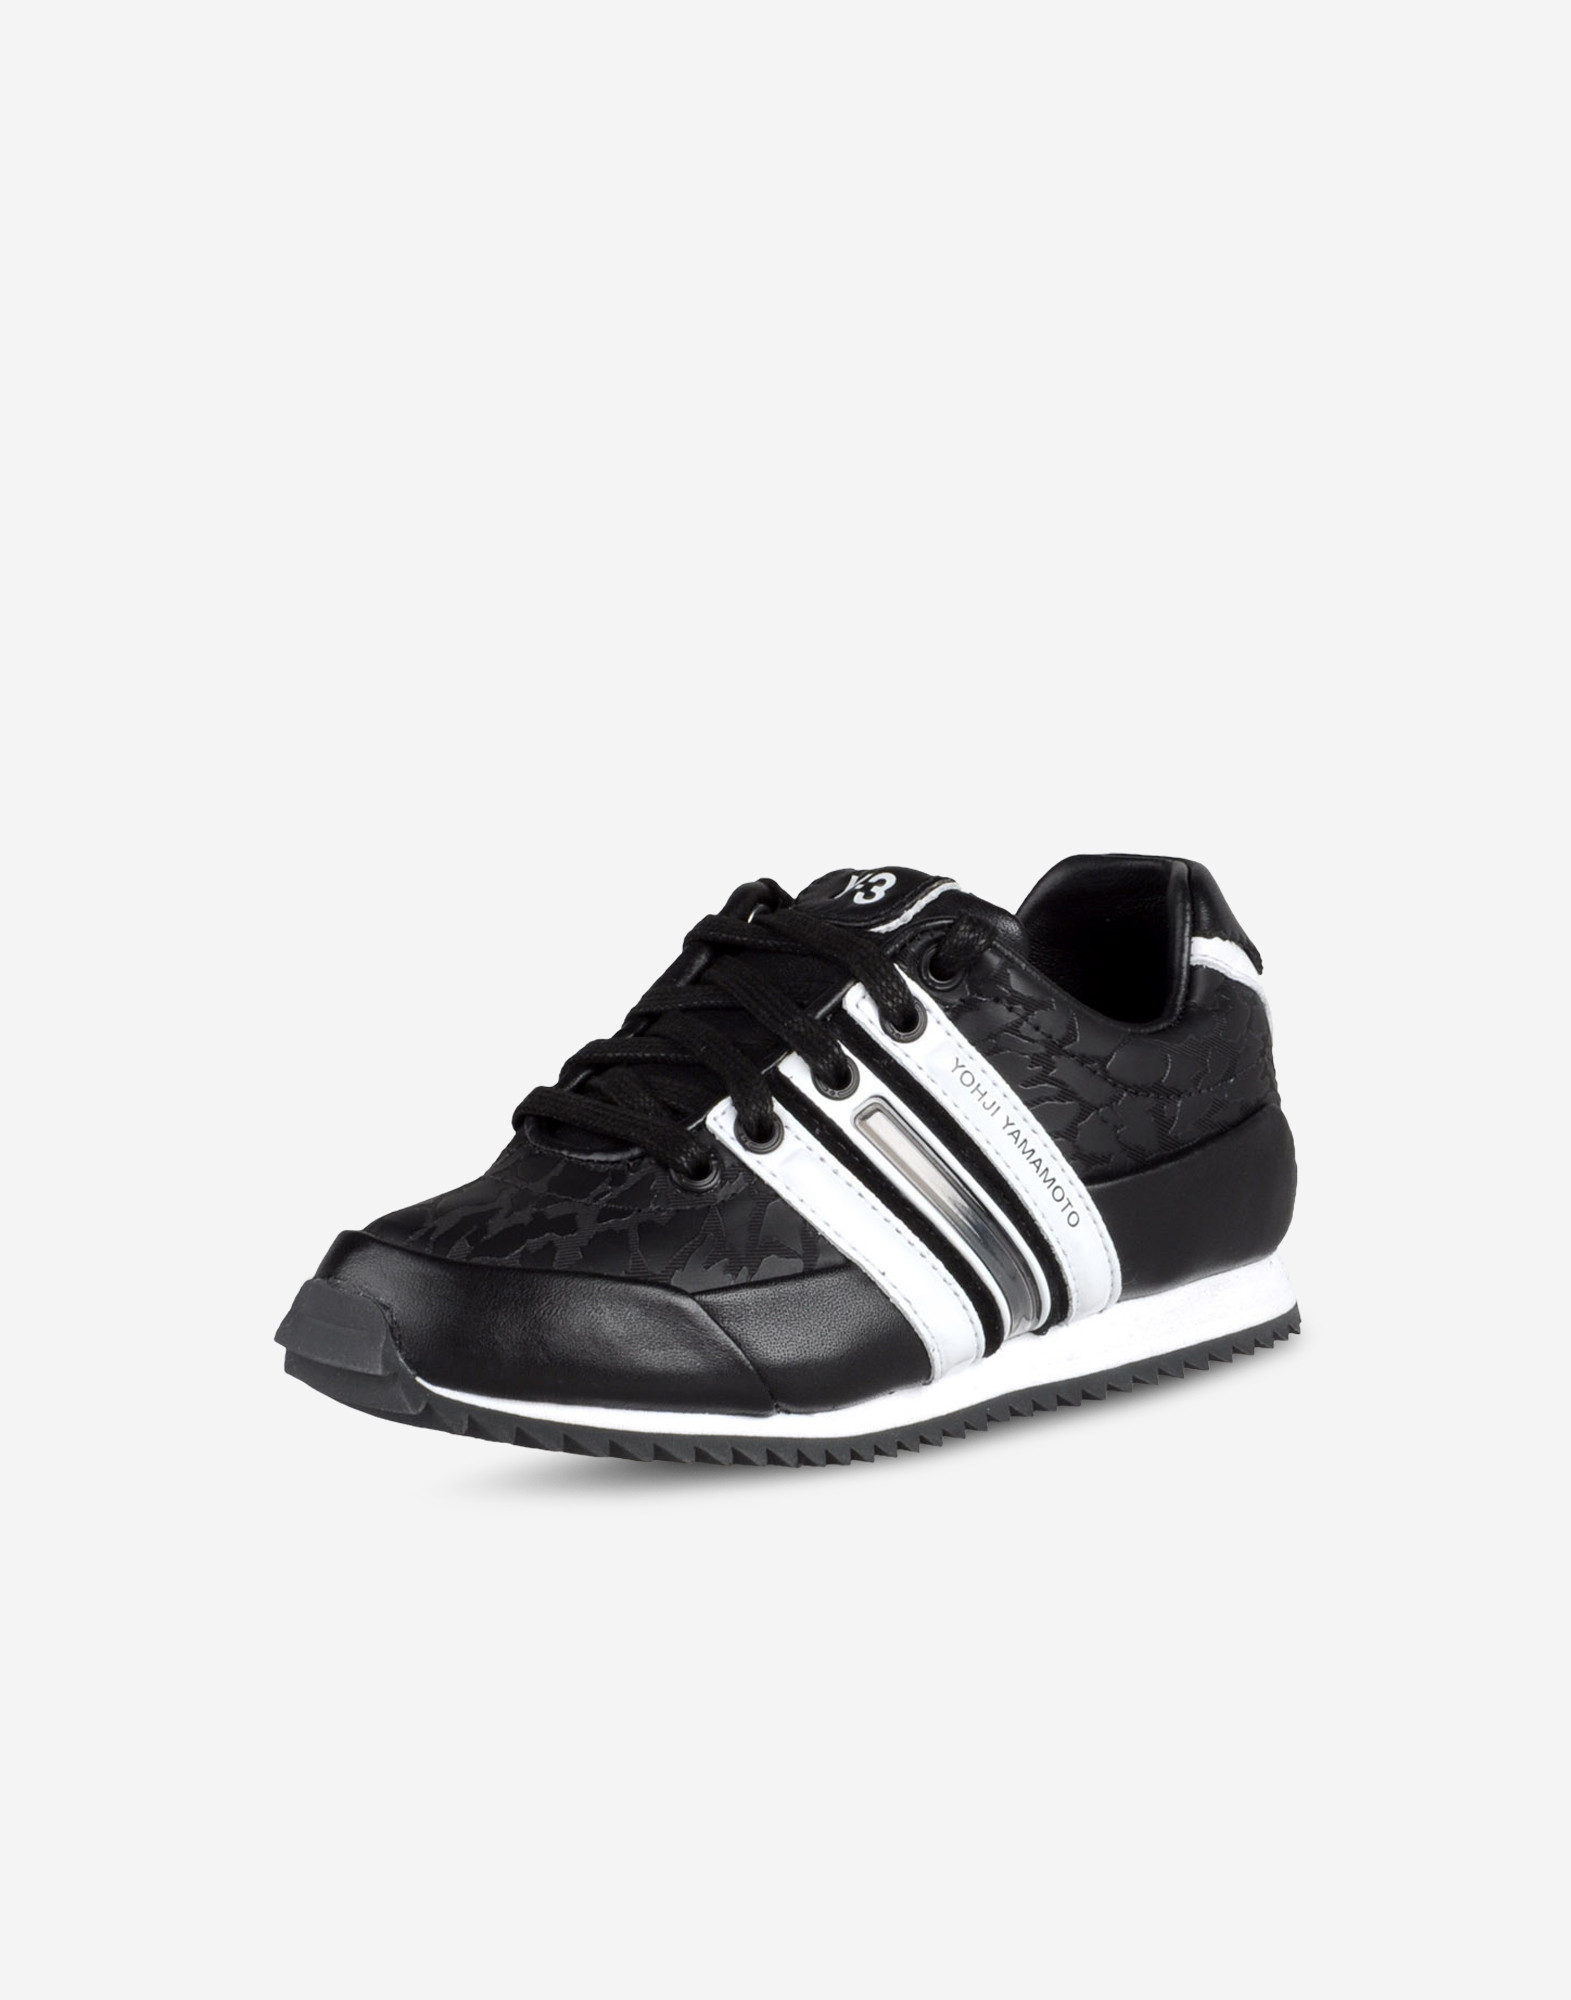 boys y3 trainers cheap online